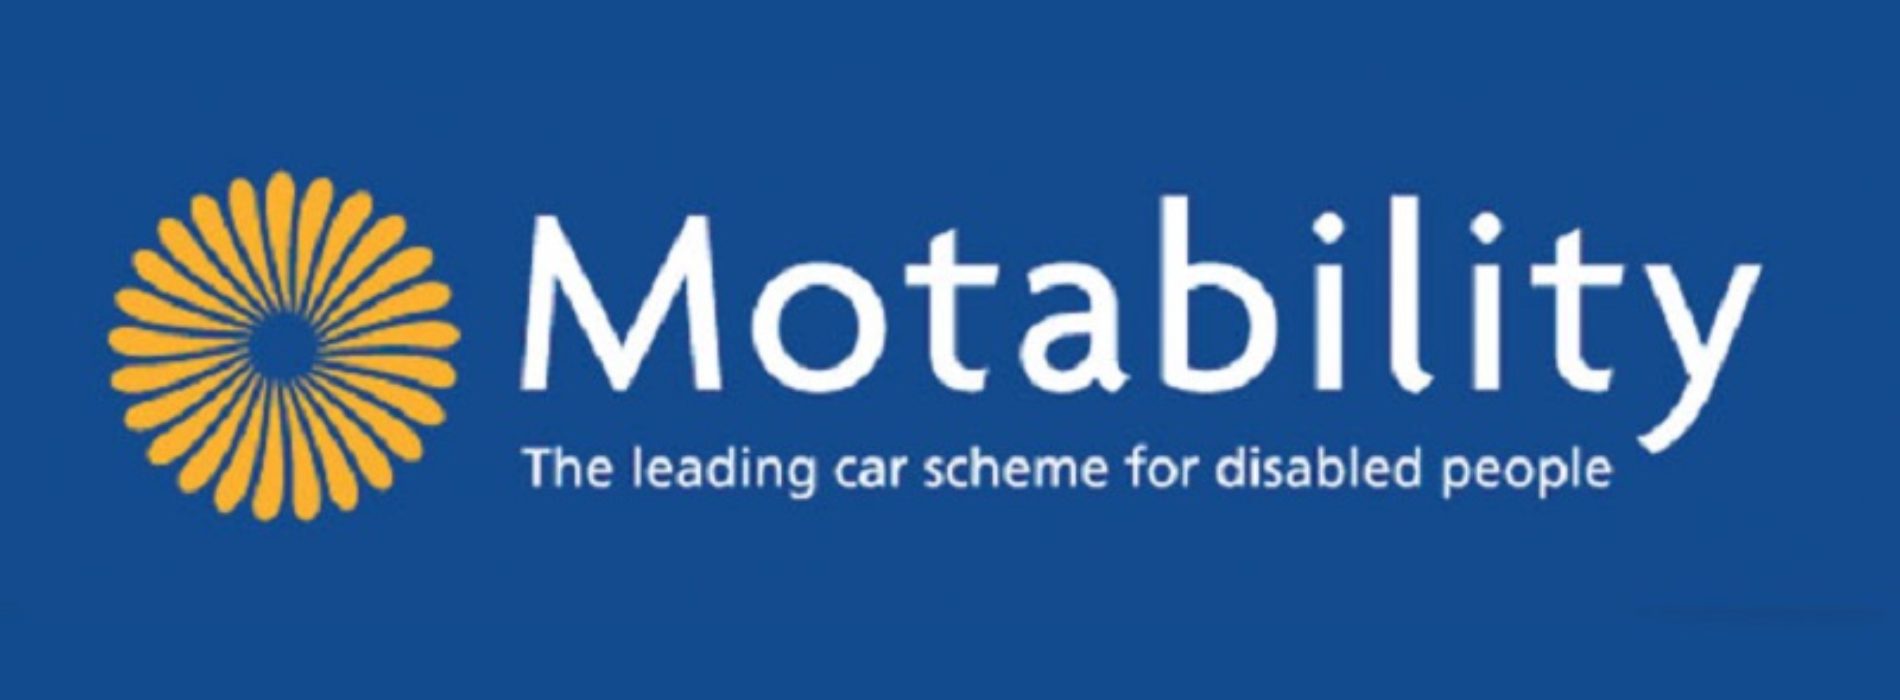 Motability Scheme for disabled persons